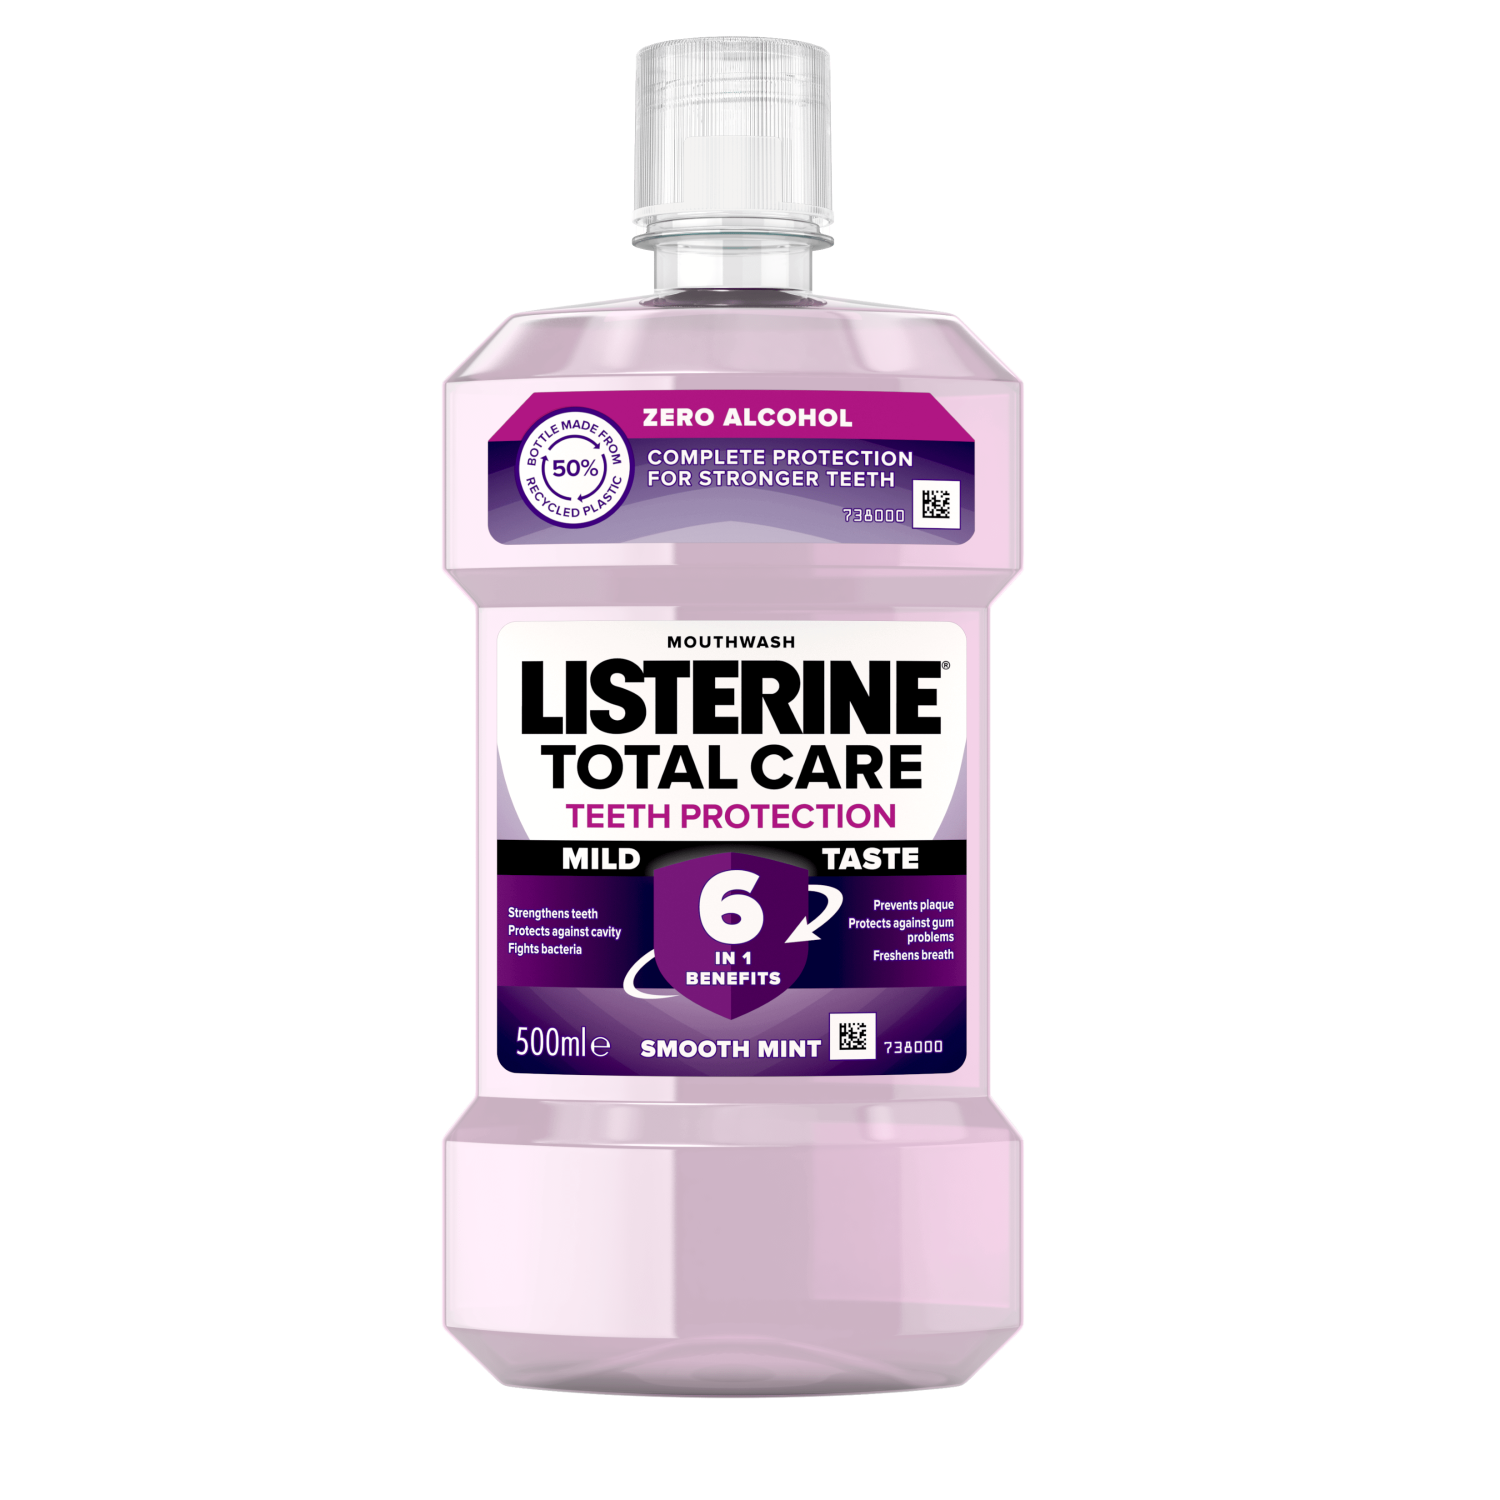 Listerine Total Care Teeth Protection 6 benefits in 1 Mild Taste 500 ml termékfotó, complete protection for stronger teeth, strengthens teeth, protects against cavity, fights bacteria, prevents plaque, protects against gum problems, freshens breath feliratokkal